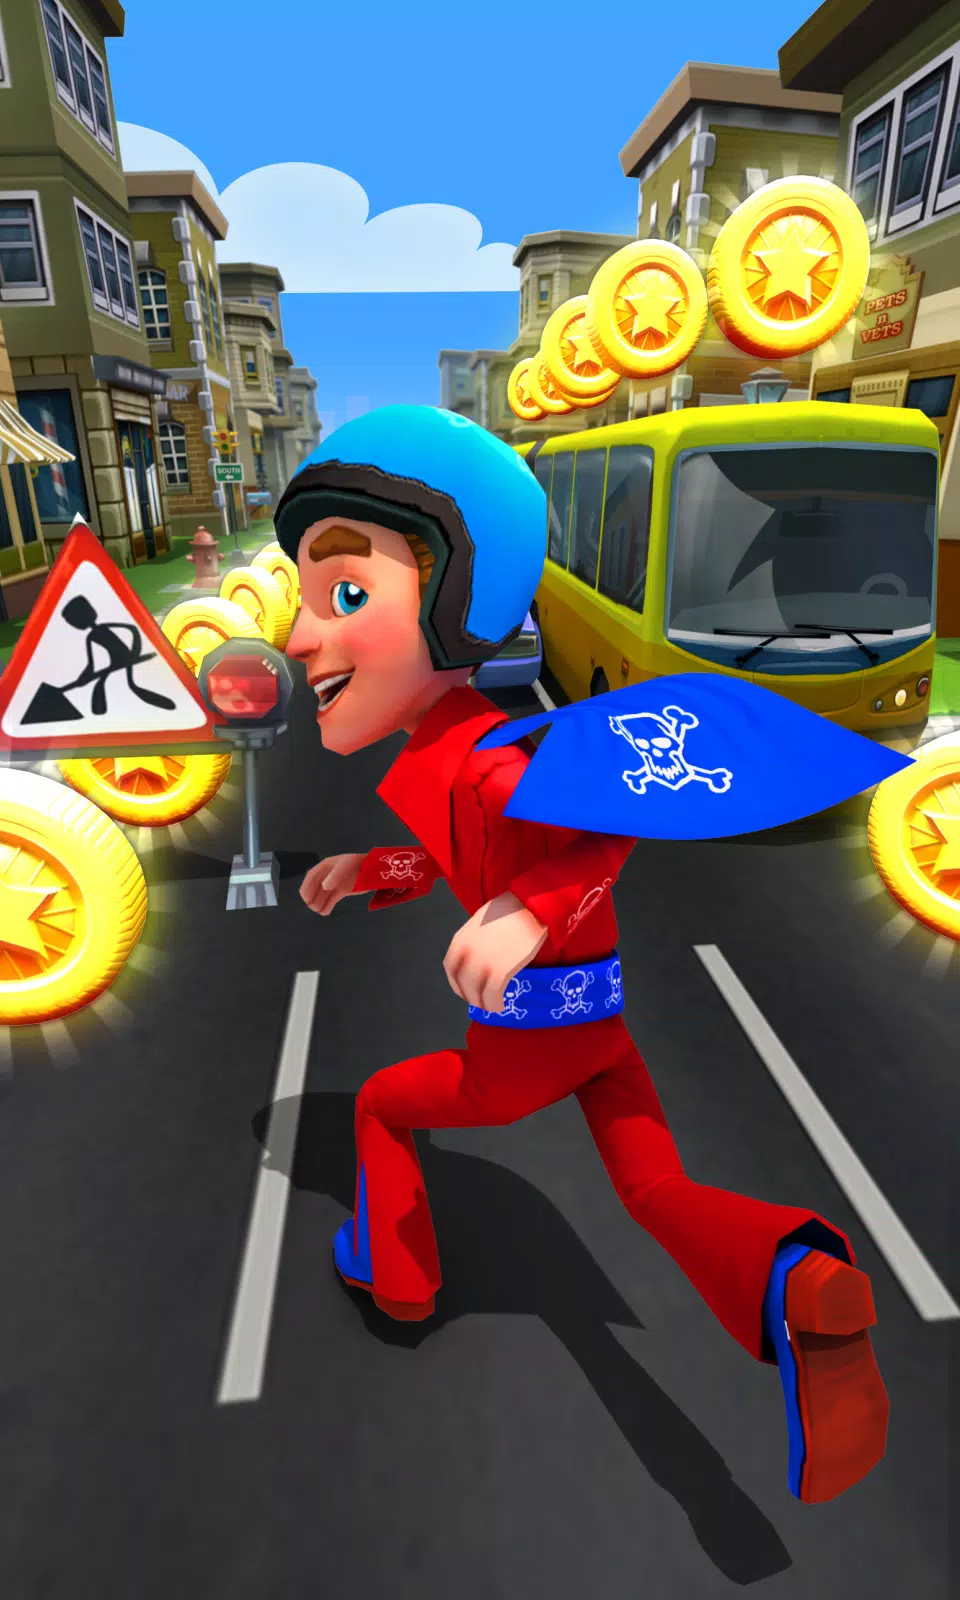 Subway Surfers 1.4 Download APK 2023 latest 1.4.0 for Android